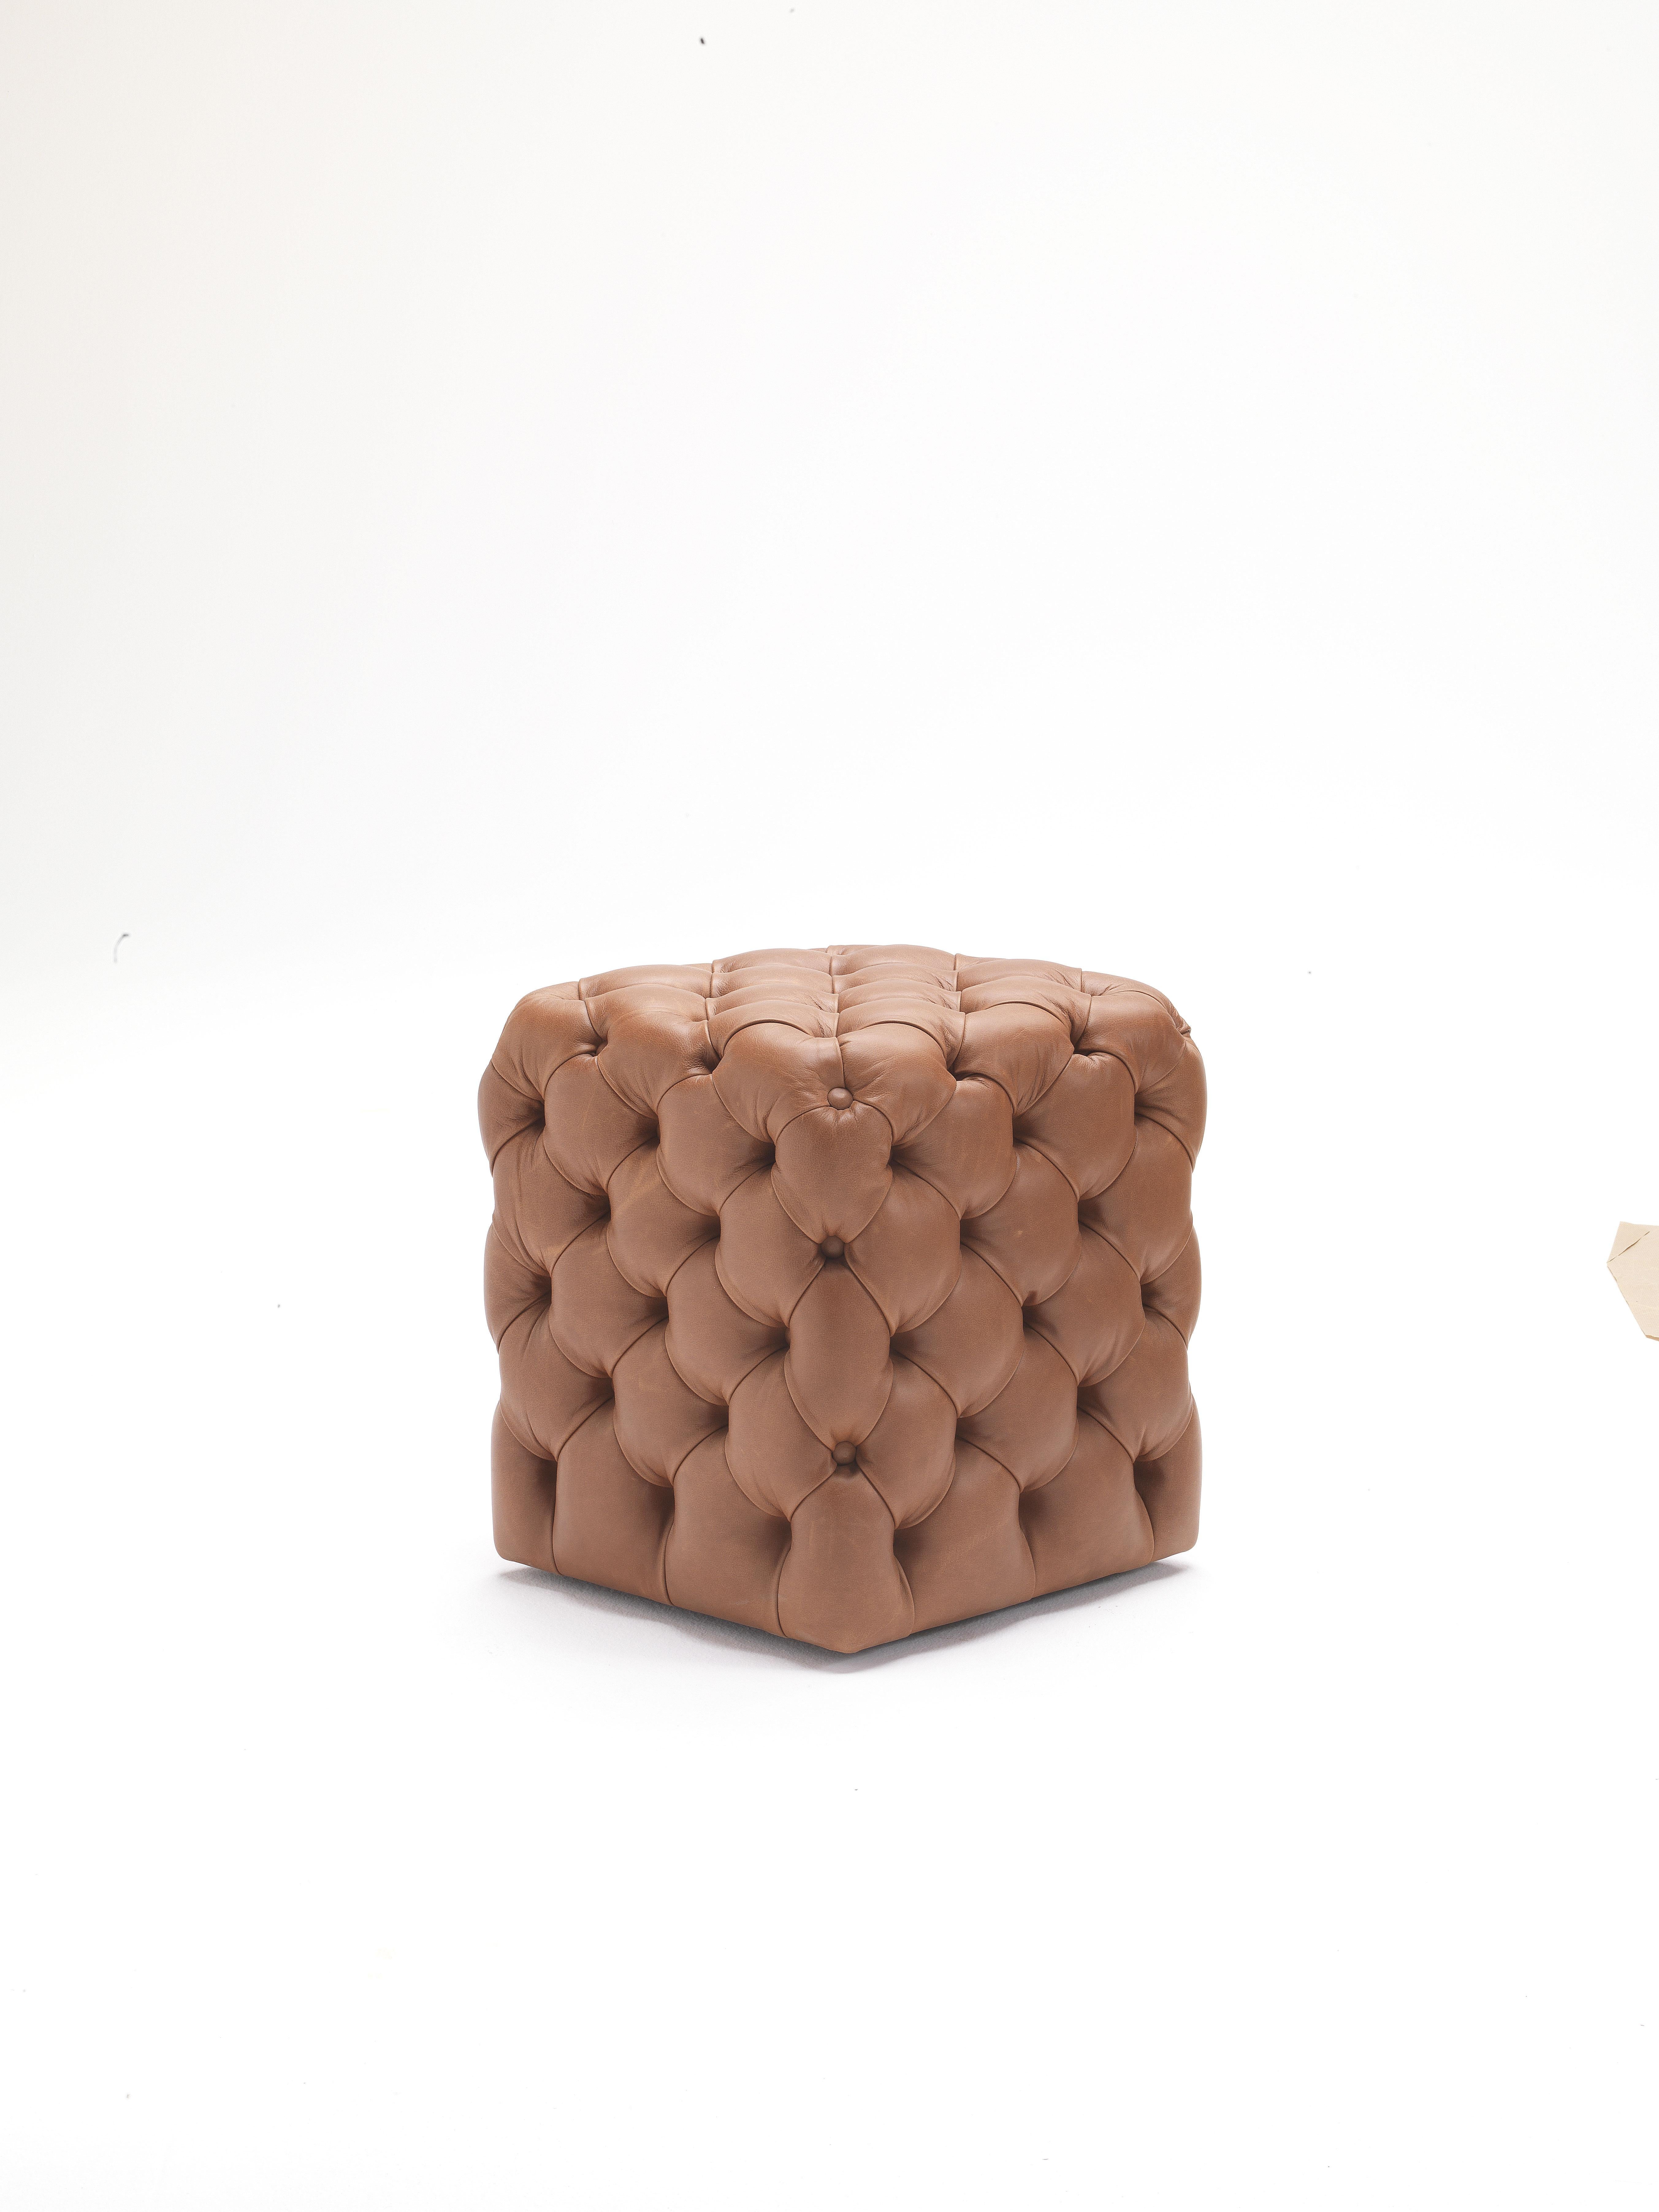 Pouf with non-deformable poliurethane foam of different densities, wrapped with acrylic fiber. Covered in leather, eco-leather or fabric of the collection.